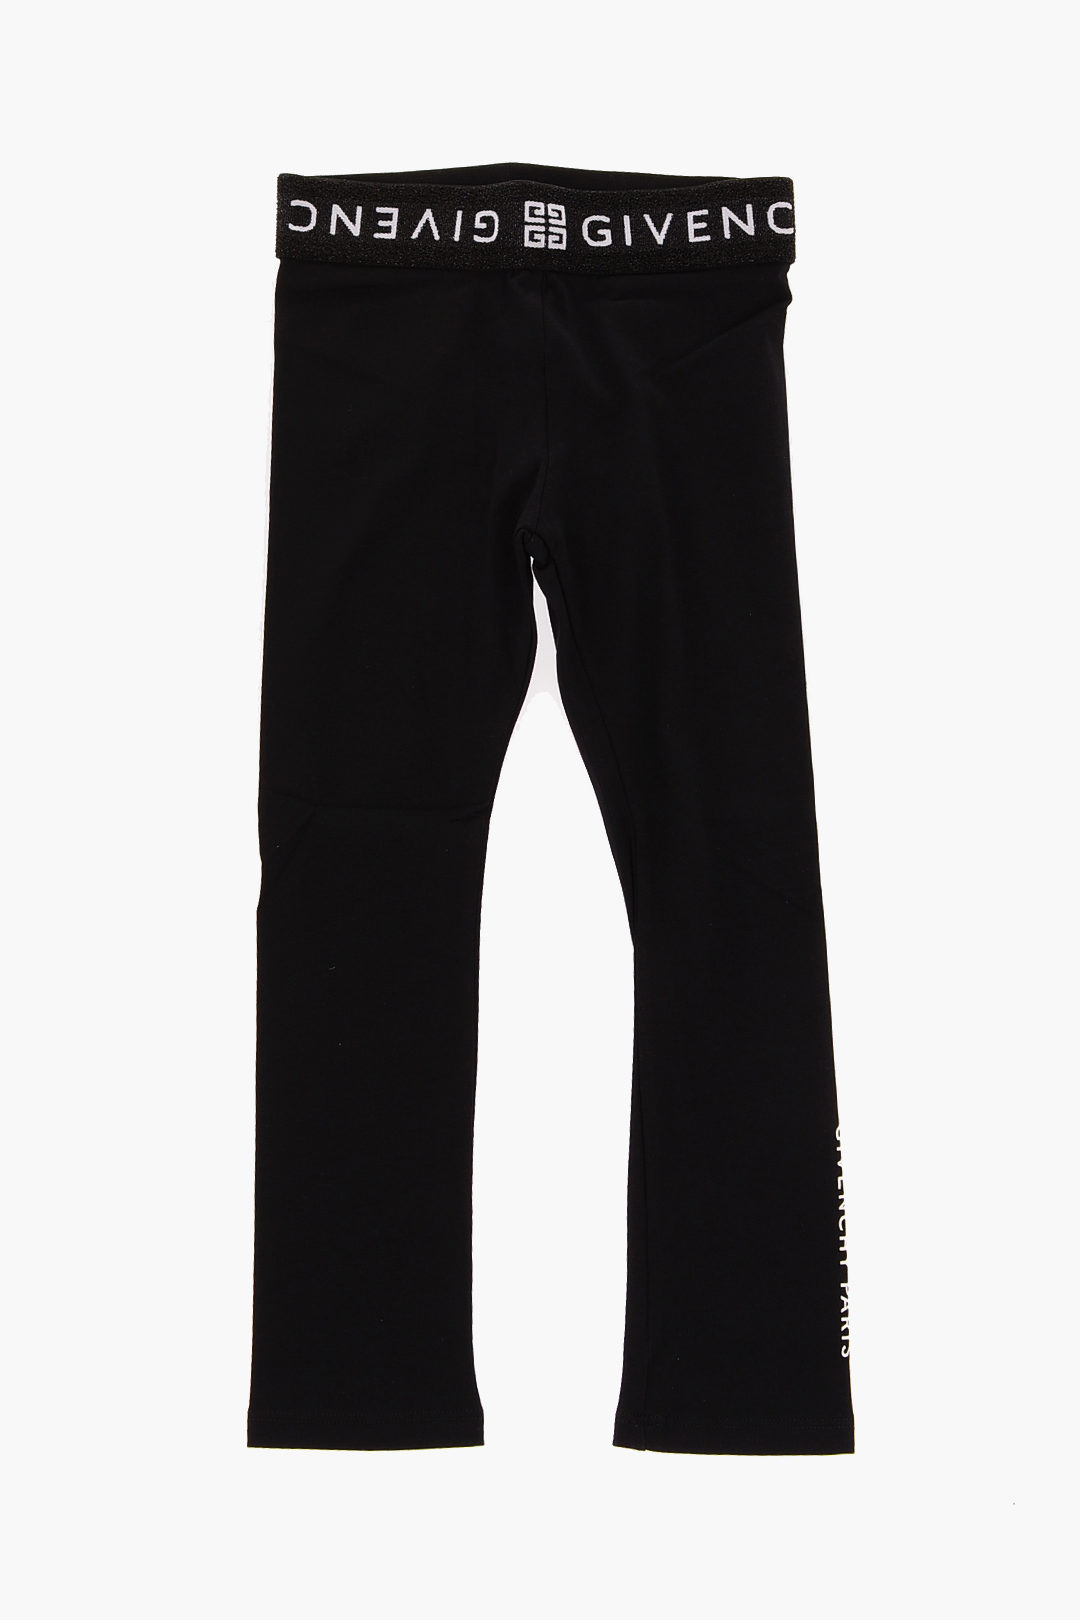 Givenchy KIDS stretch leggings girls - Glamood Outlet